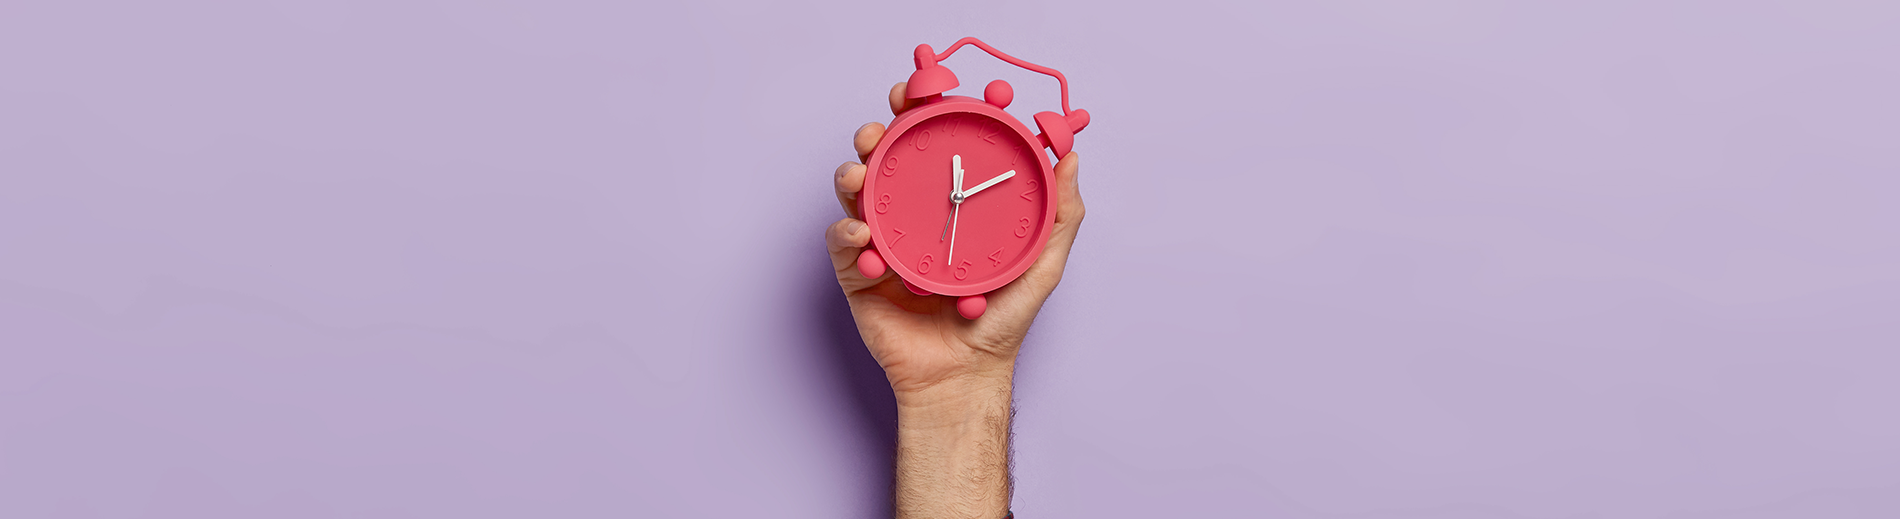 hand with a pink alarm clock 